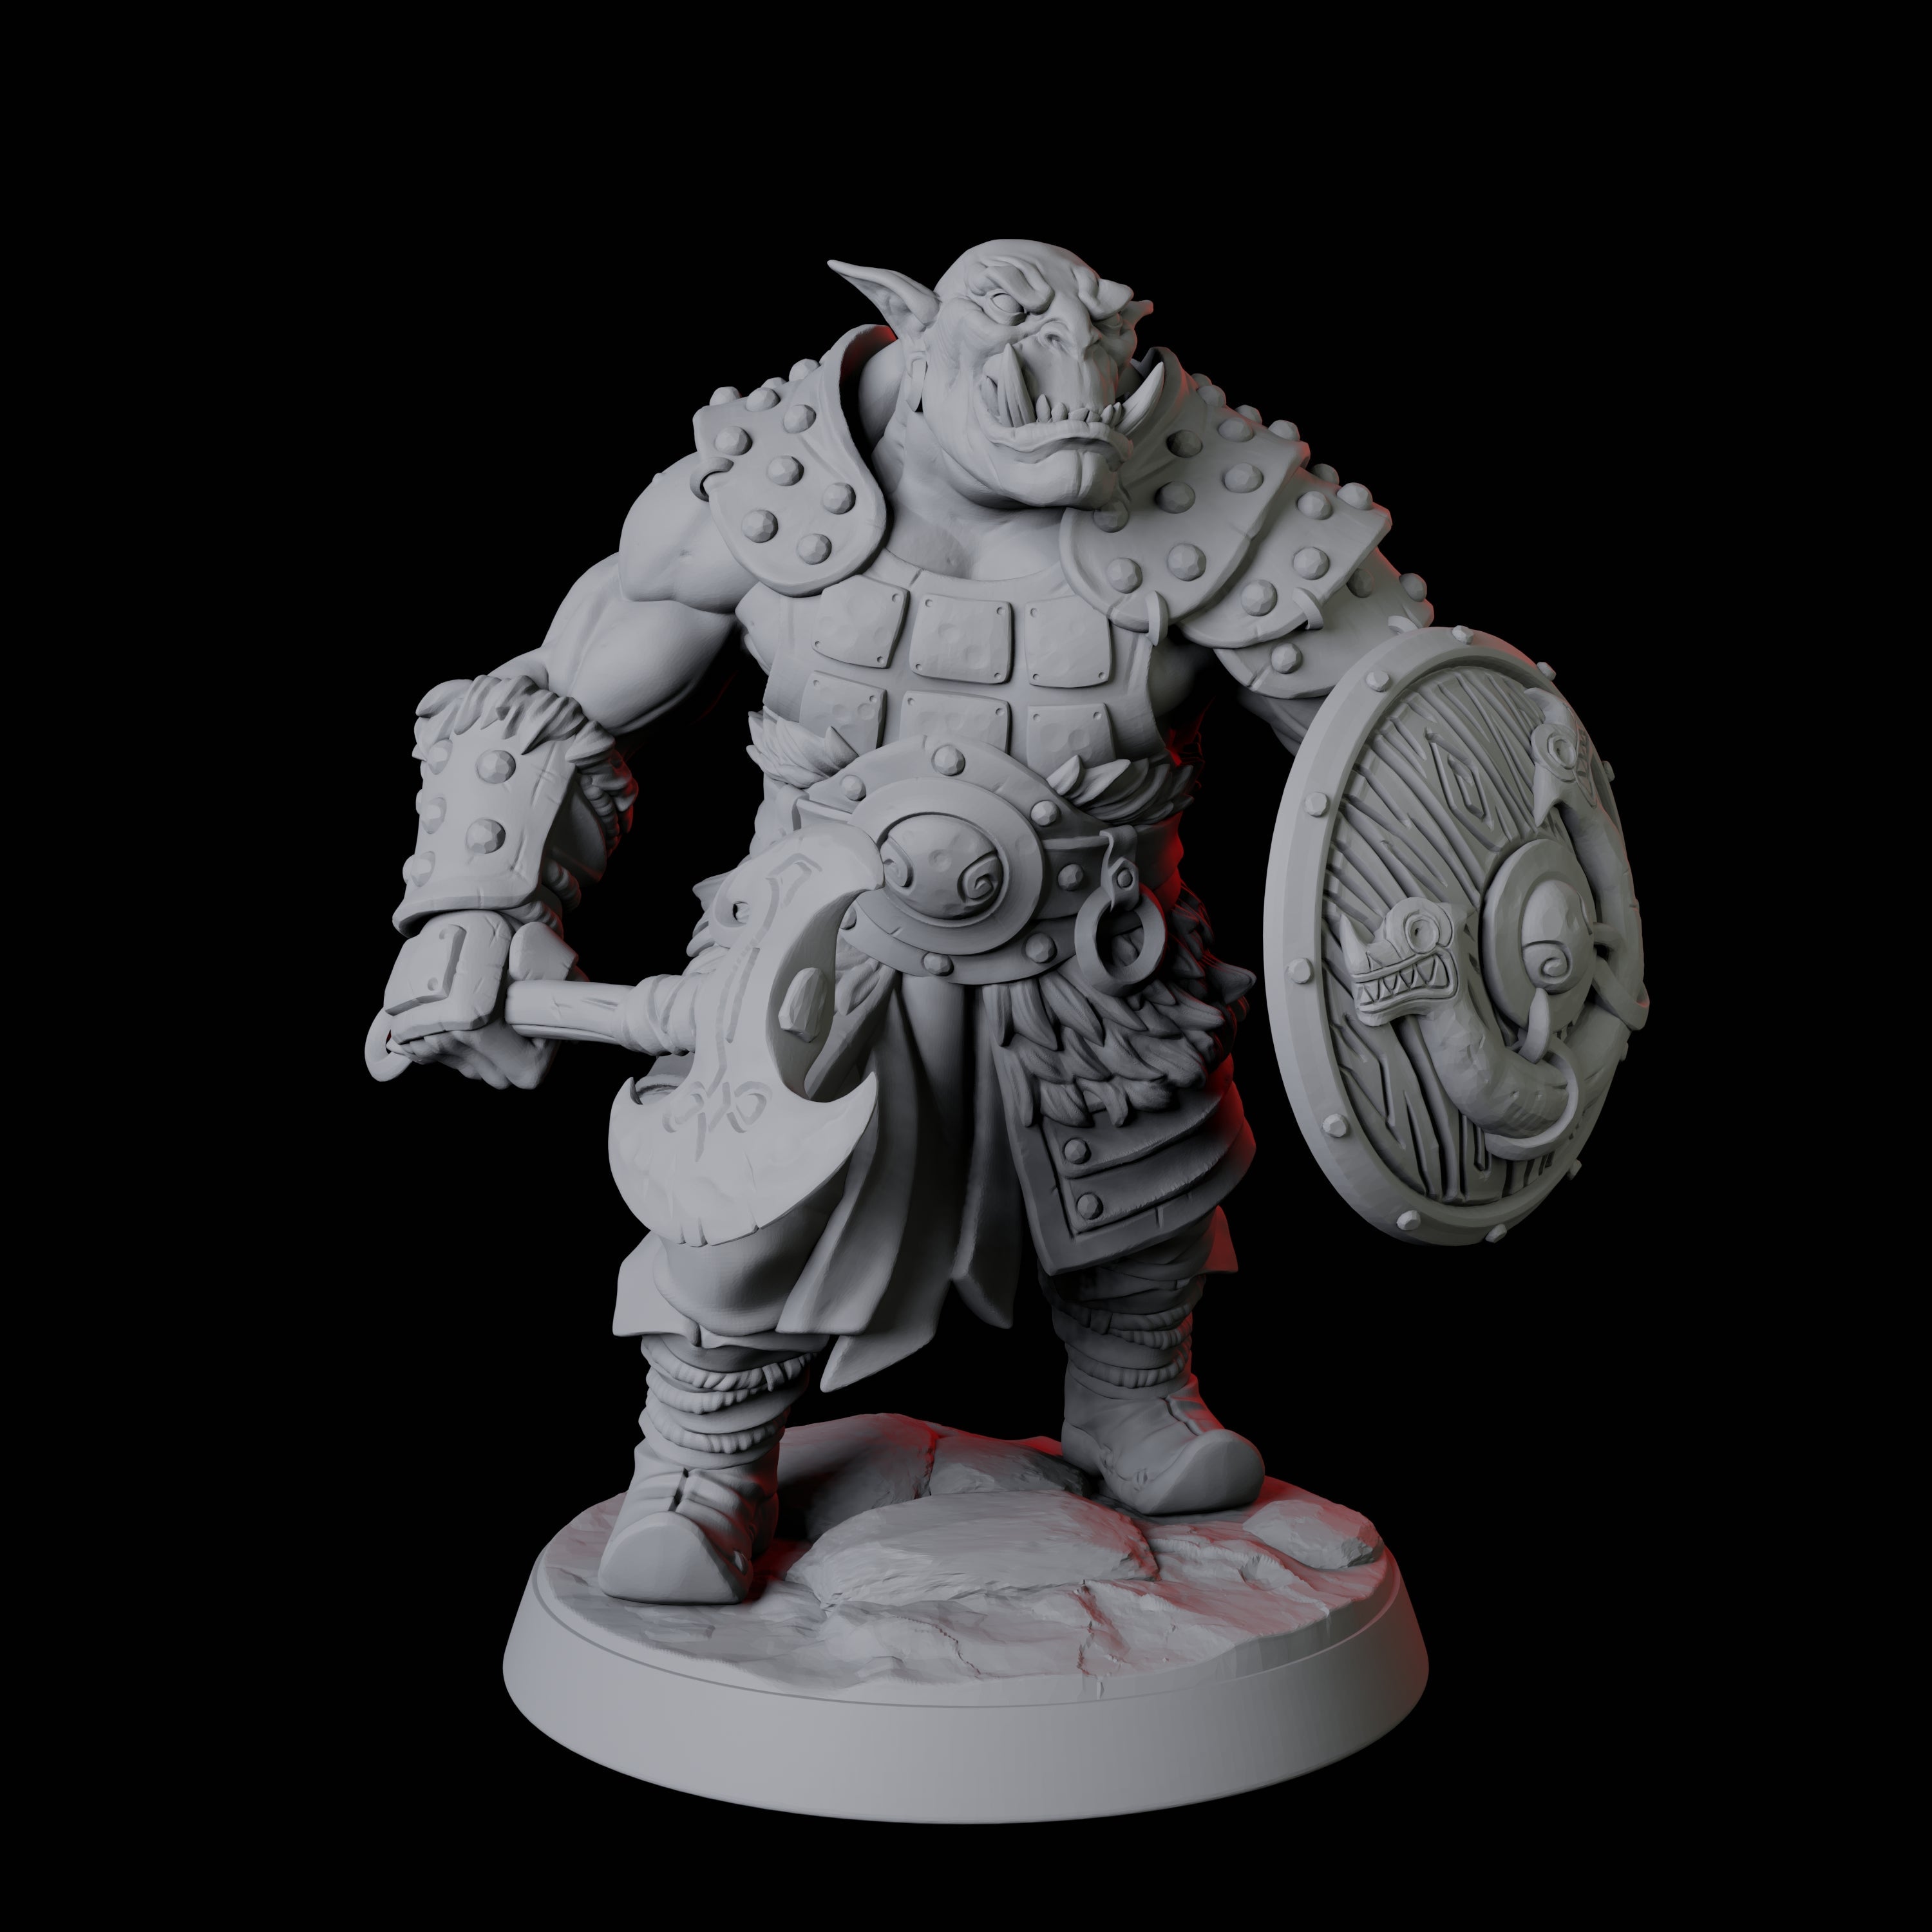 Mountain Orc Warrior A Miniature for Dungeons and Dragons, Pathfinder or other TTRPGs